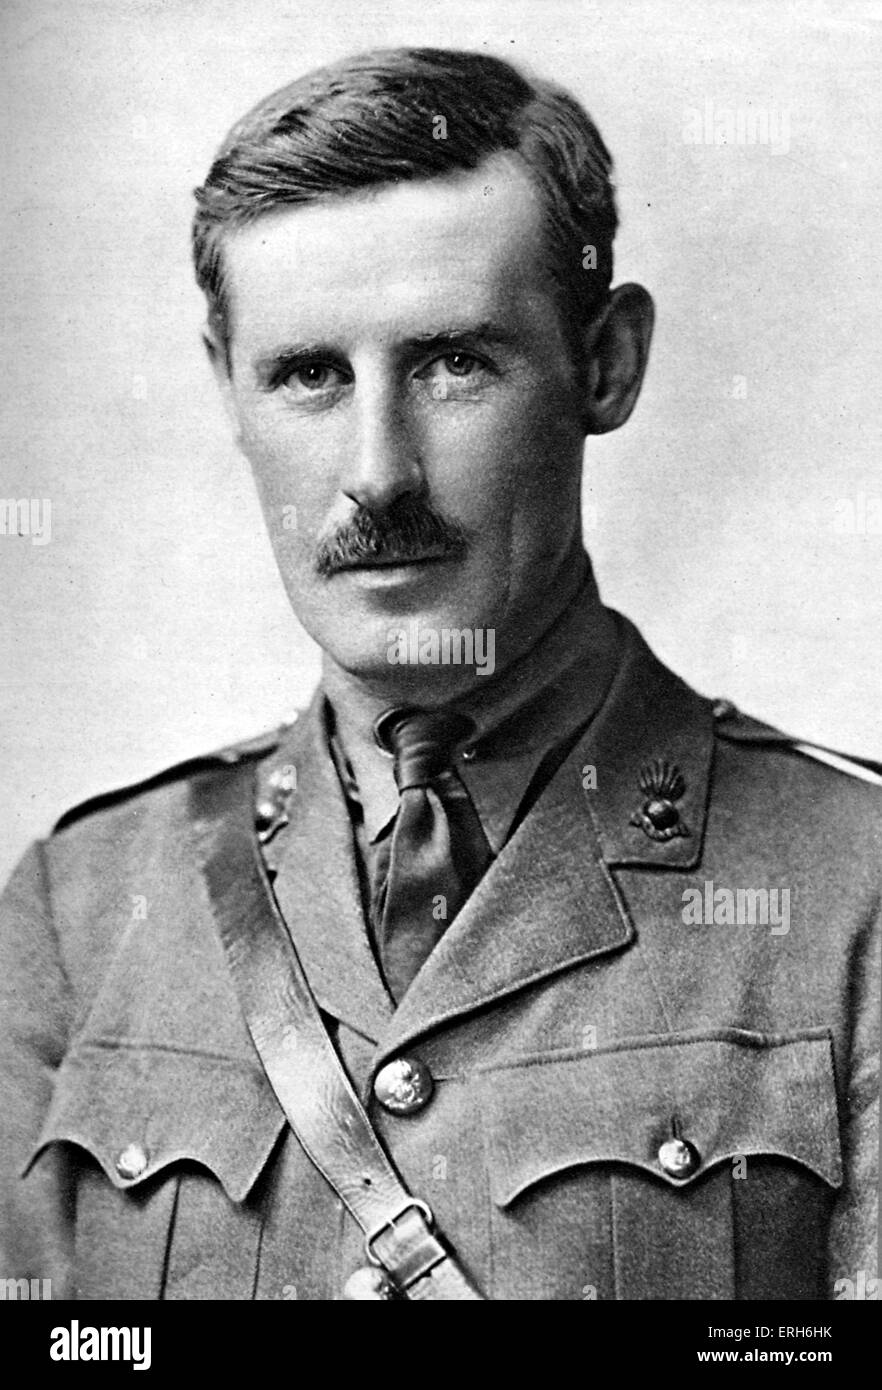 Herbert Asquith - portrait. English World War I poet, novelist and lawyer. Second son of British Prime Minister H. H. Asquith. Stock Photo